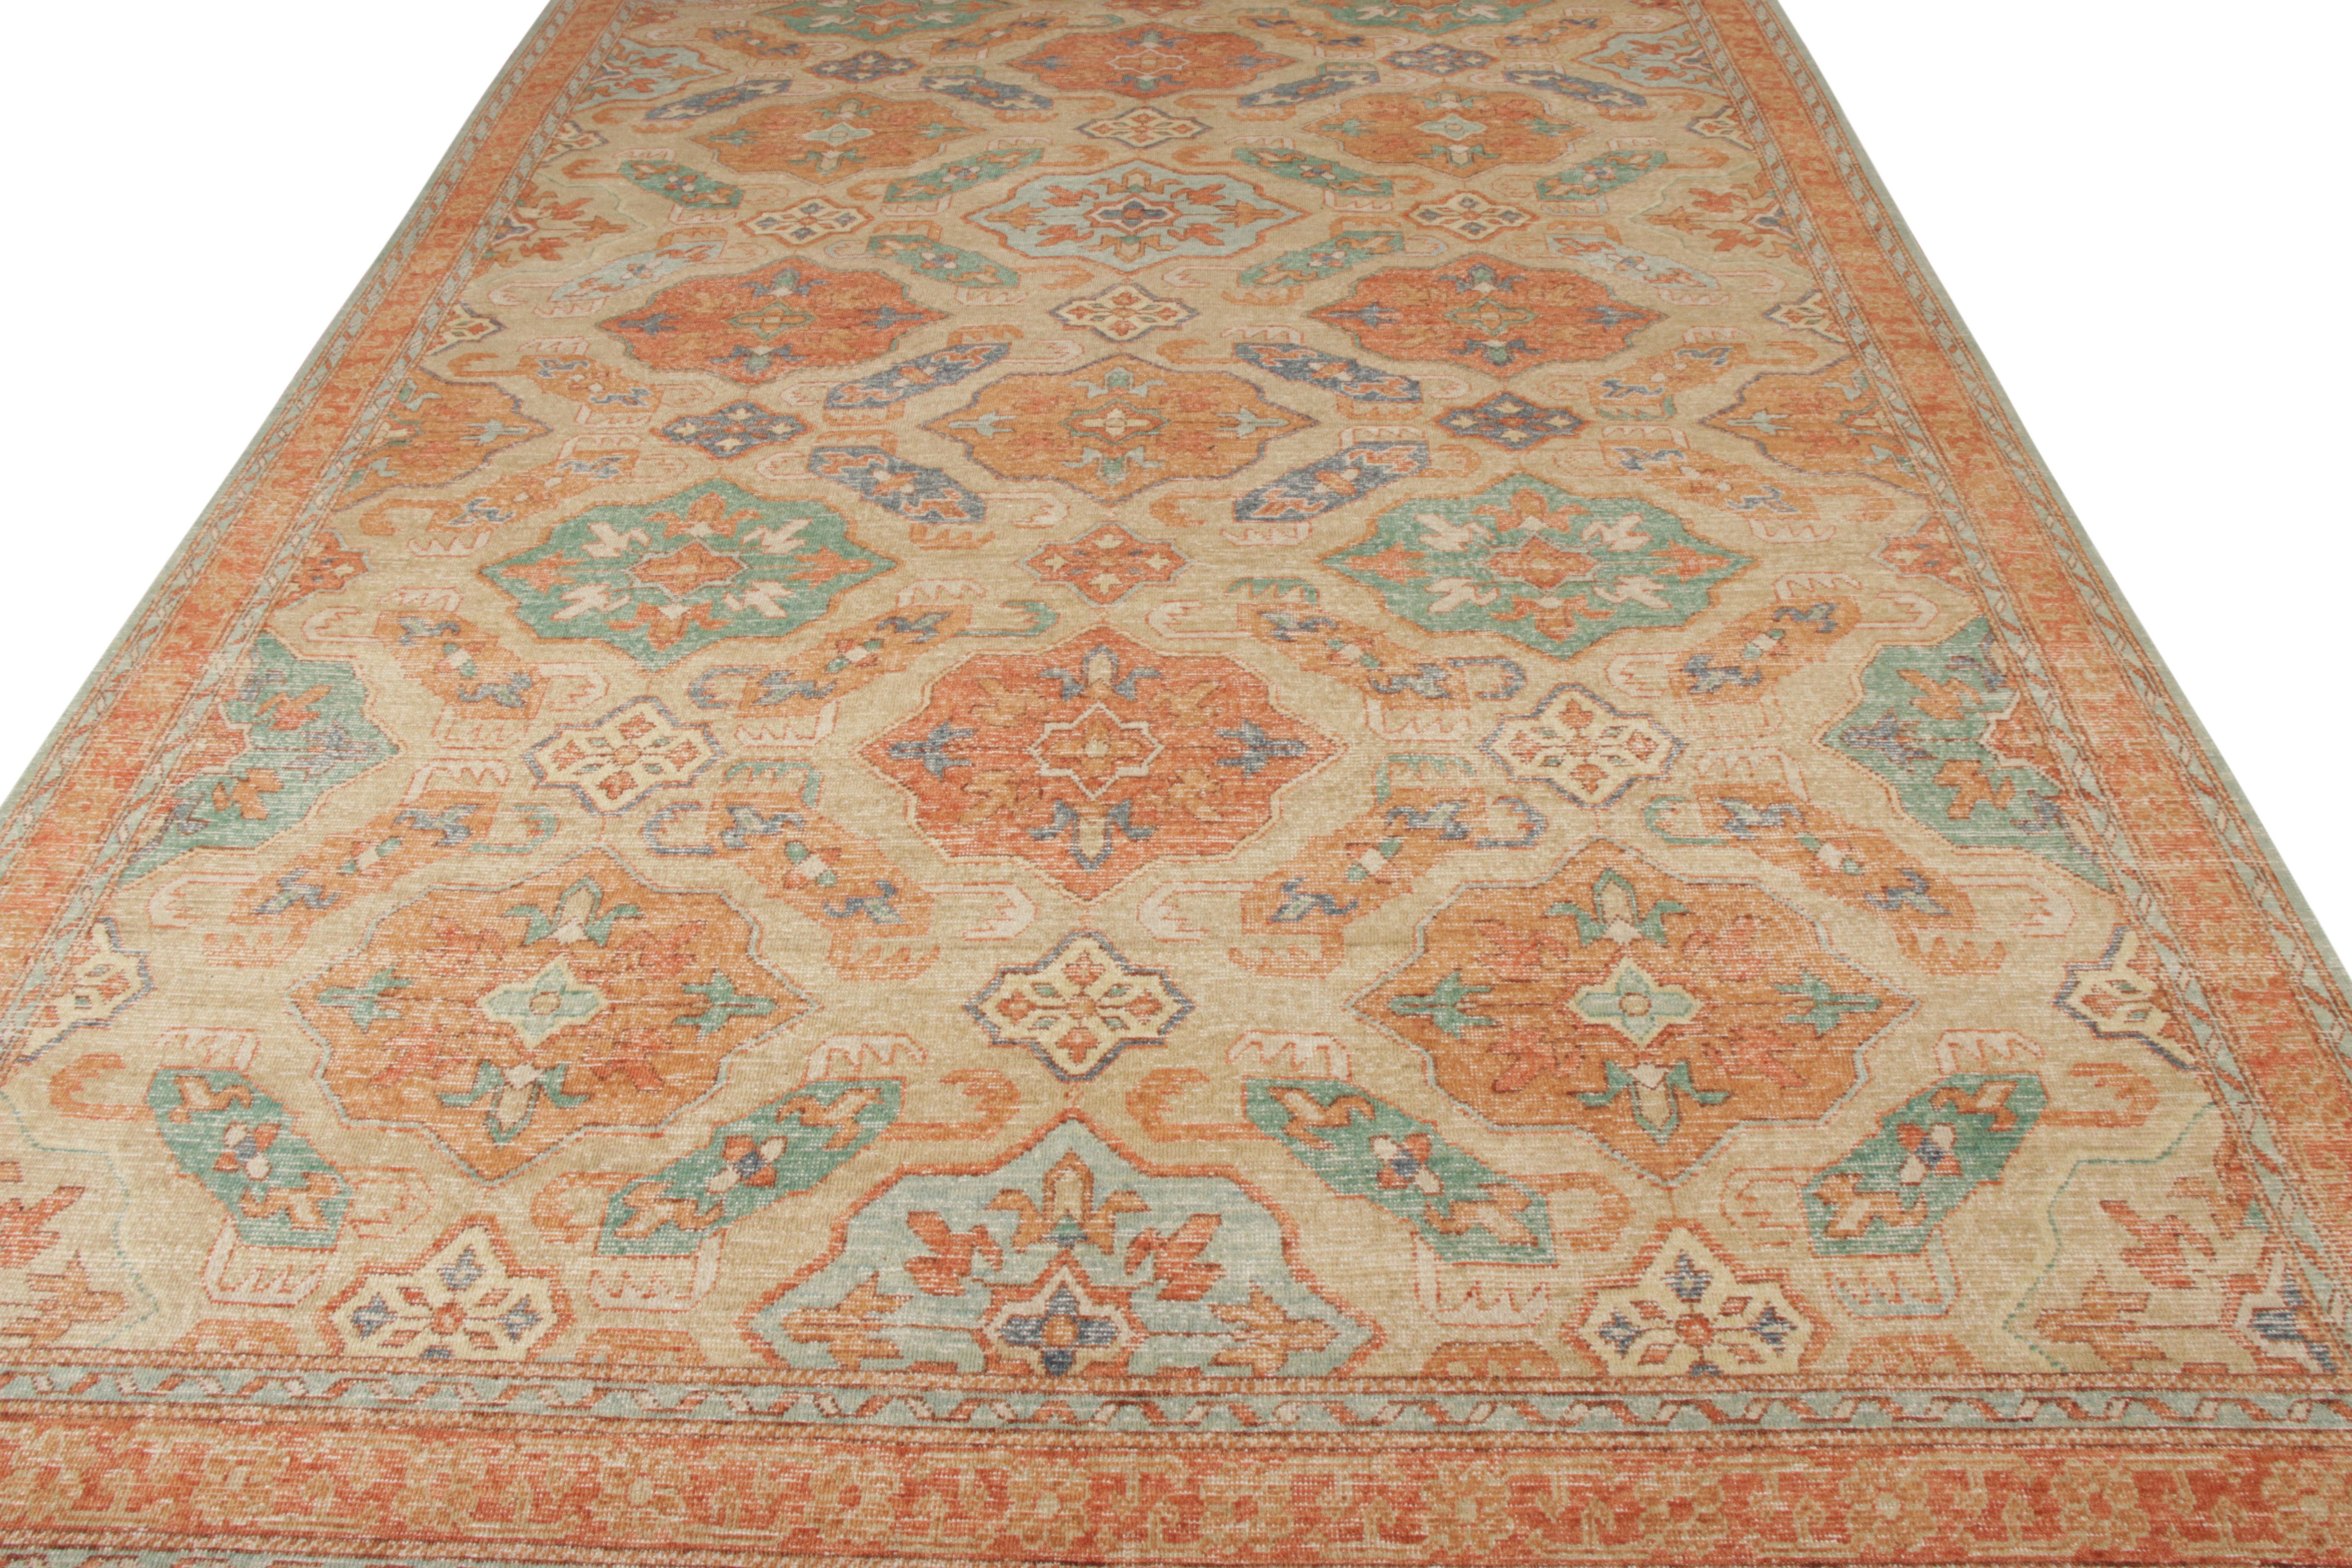 A rich hand knotted wool custom rug design from the classic selections in Rug & Kilim’s Homage Collection. Exemplified in this 10x14 edition, the low-sheared distressed pile style unique to this line plays beautifully with an elaborate transitional